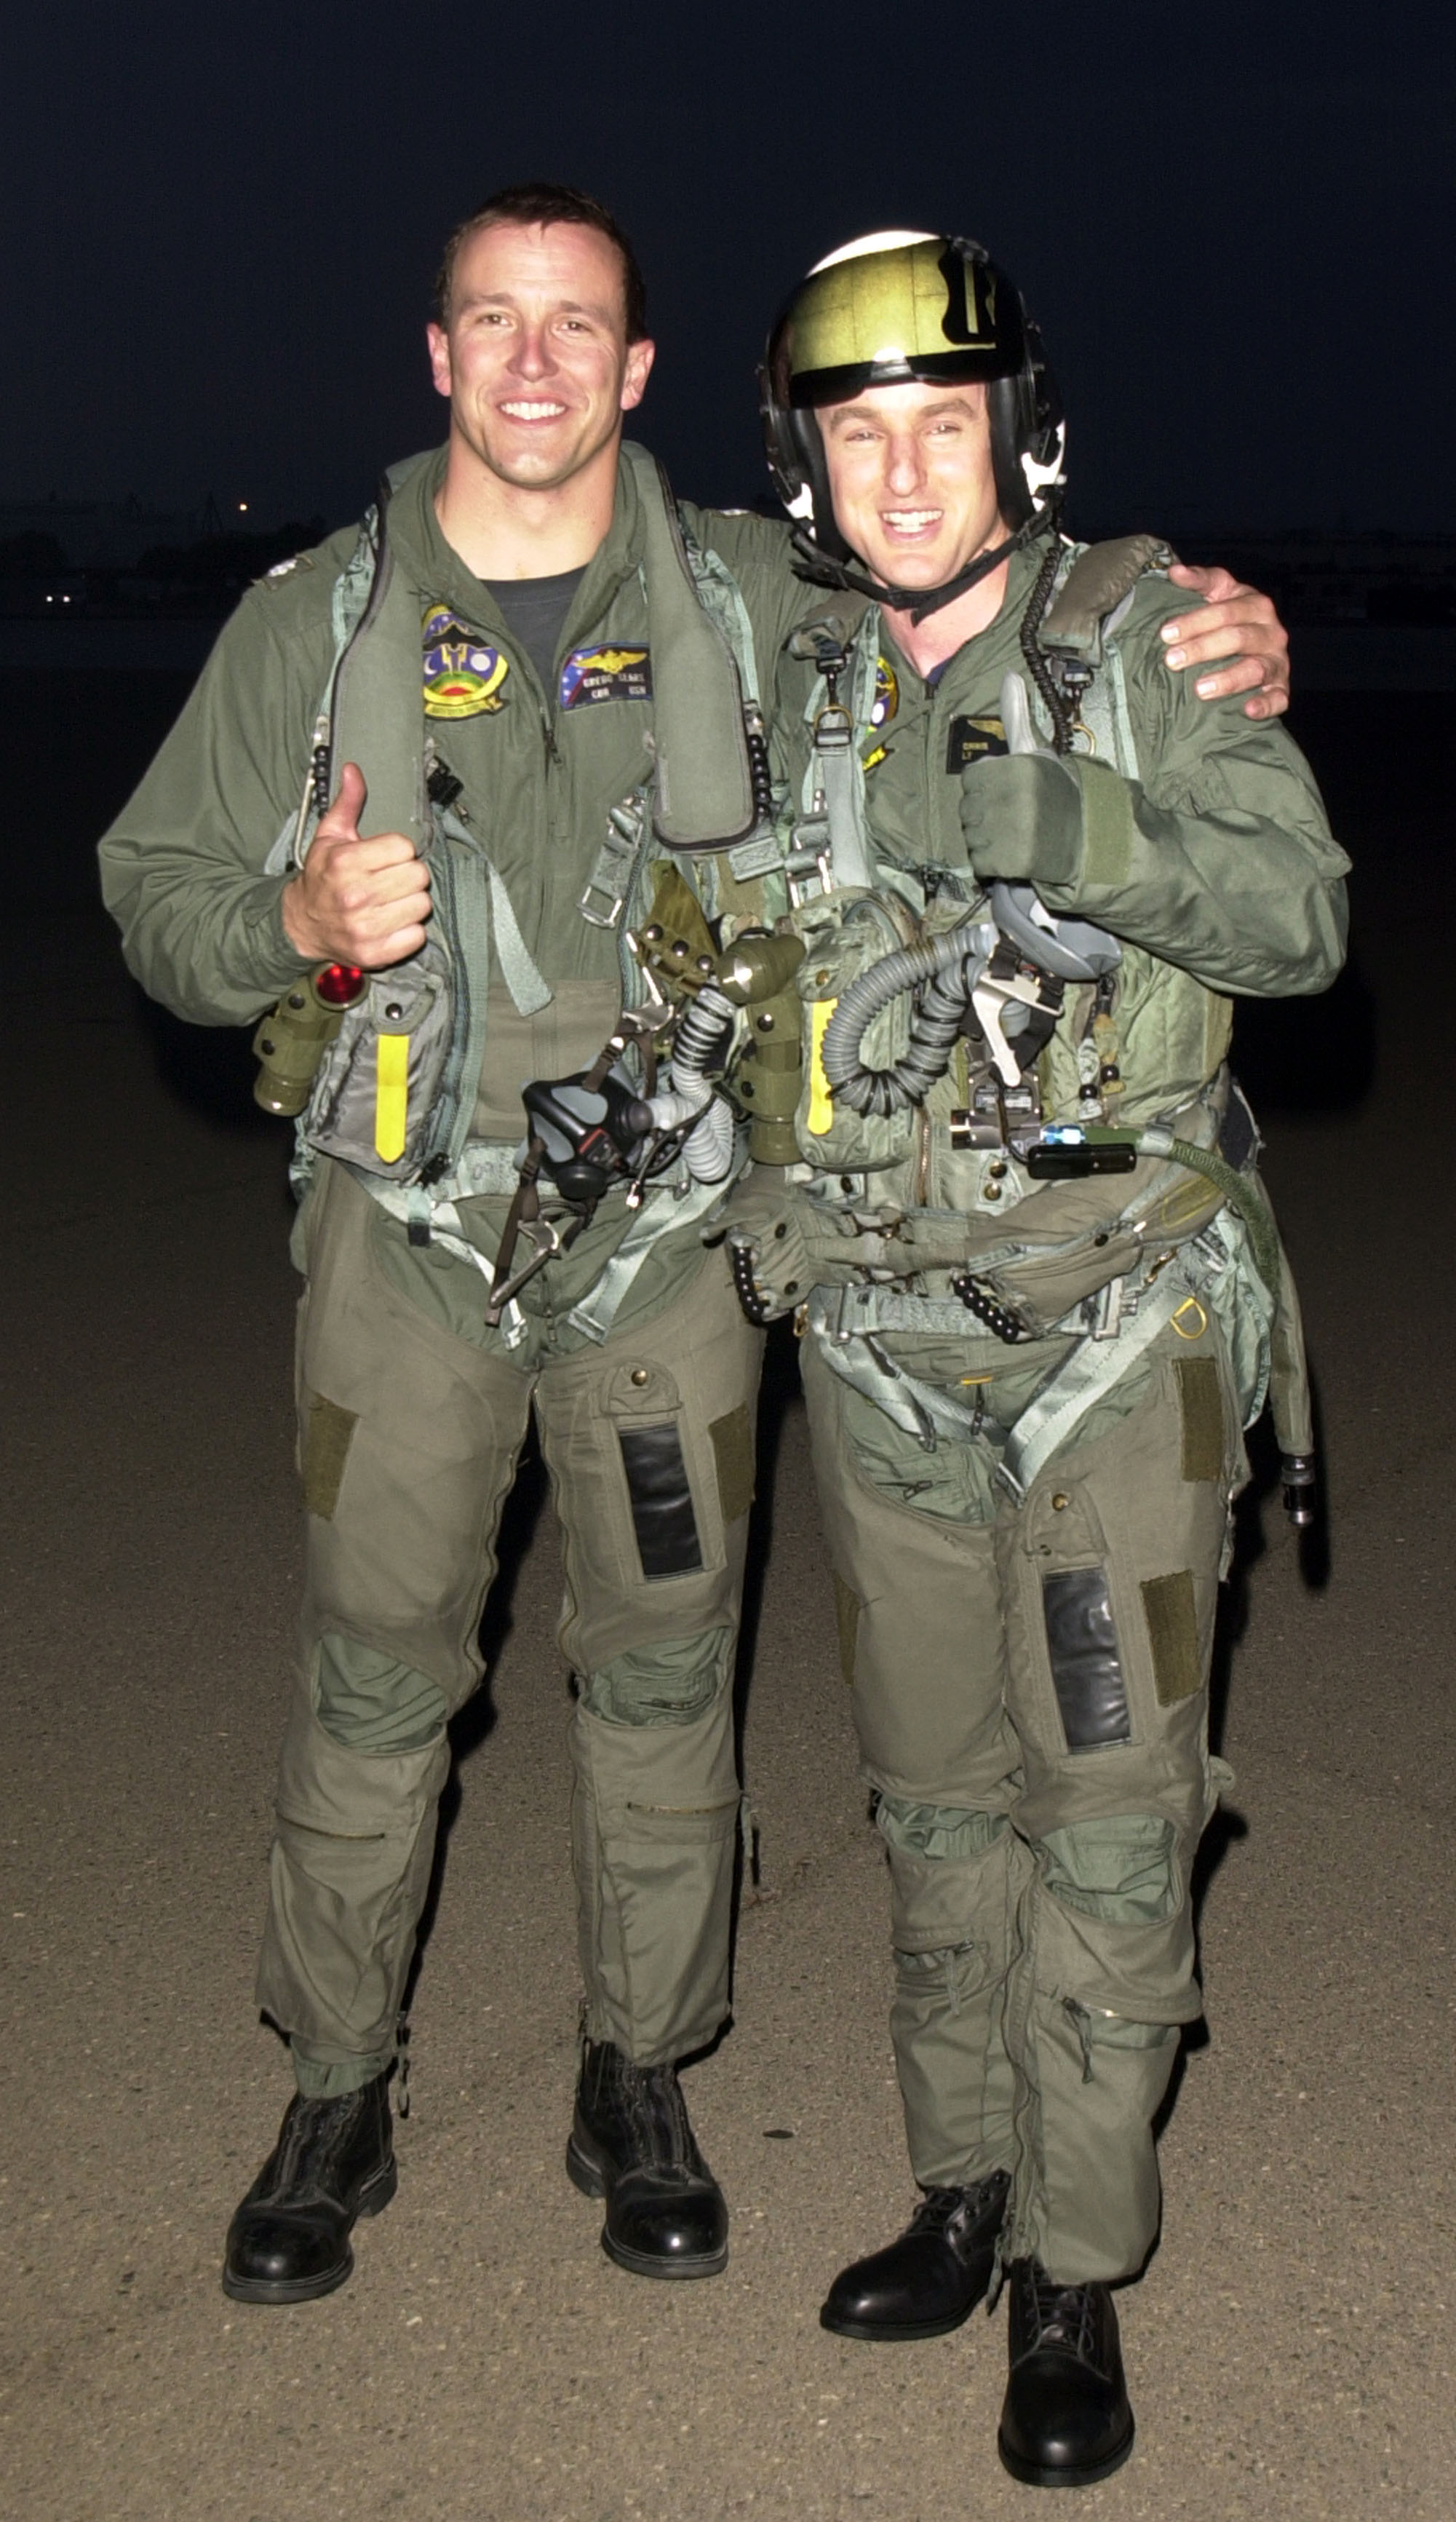 F-18 Pilot Greg Sears and Owen Wilson pose during the "Behind Enemy Lines" Navy Premiere at Naval Air Station North Island in 2001 in Coronado, California. | Source: Getty Images